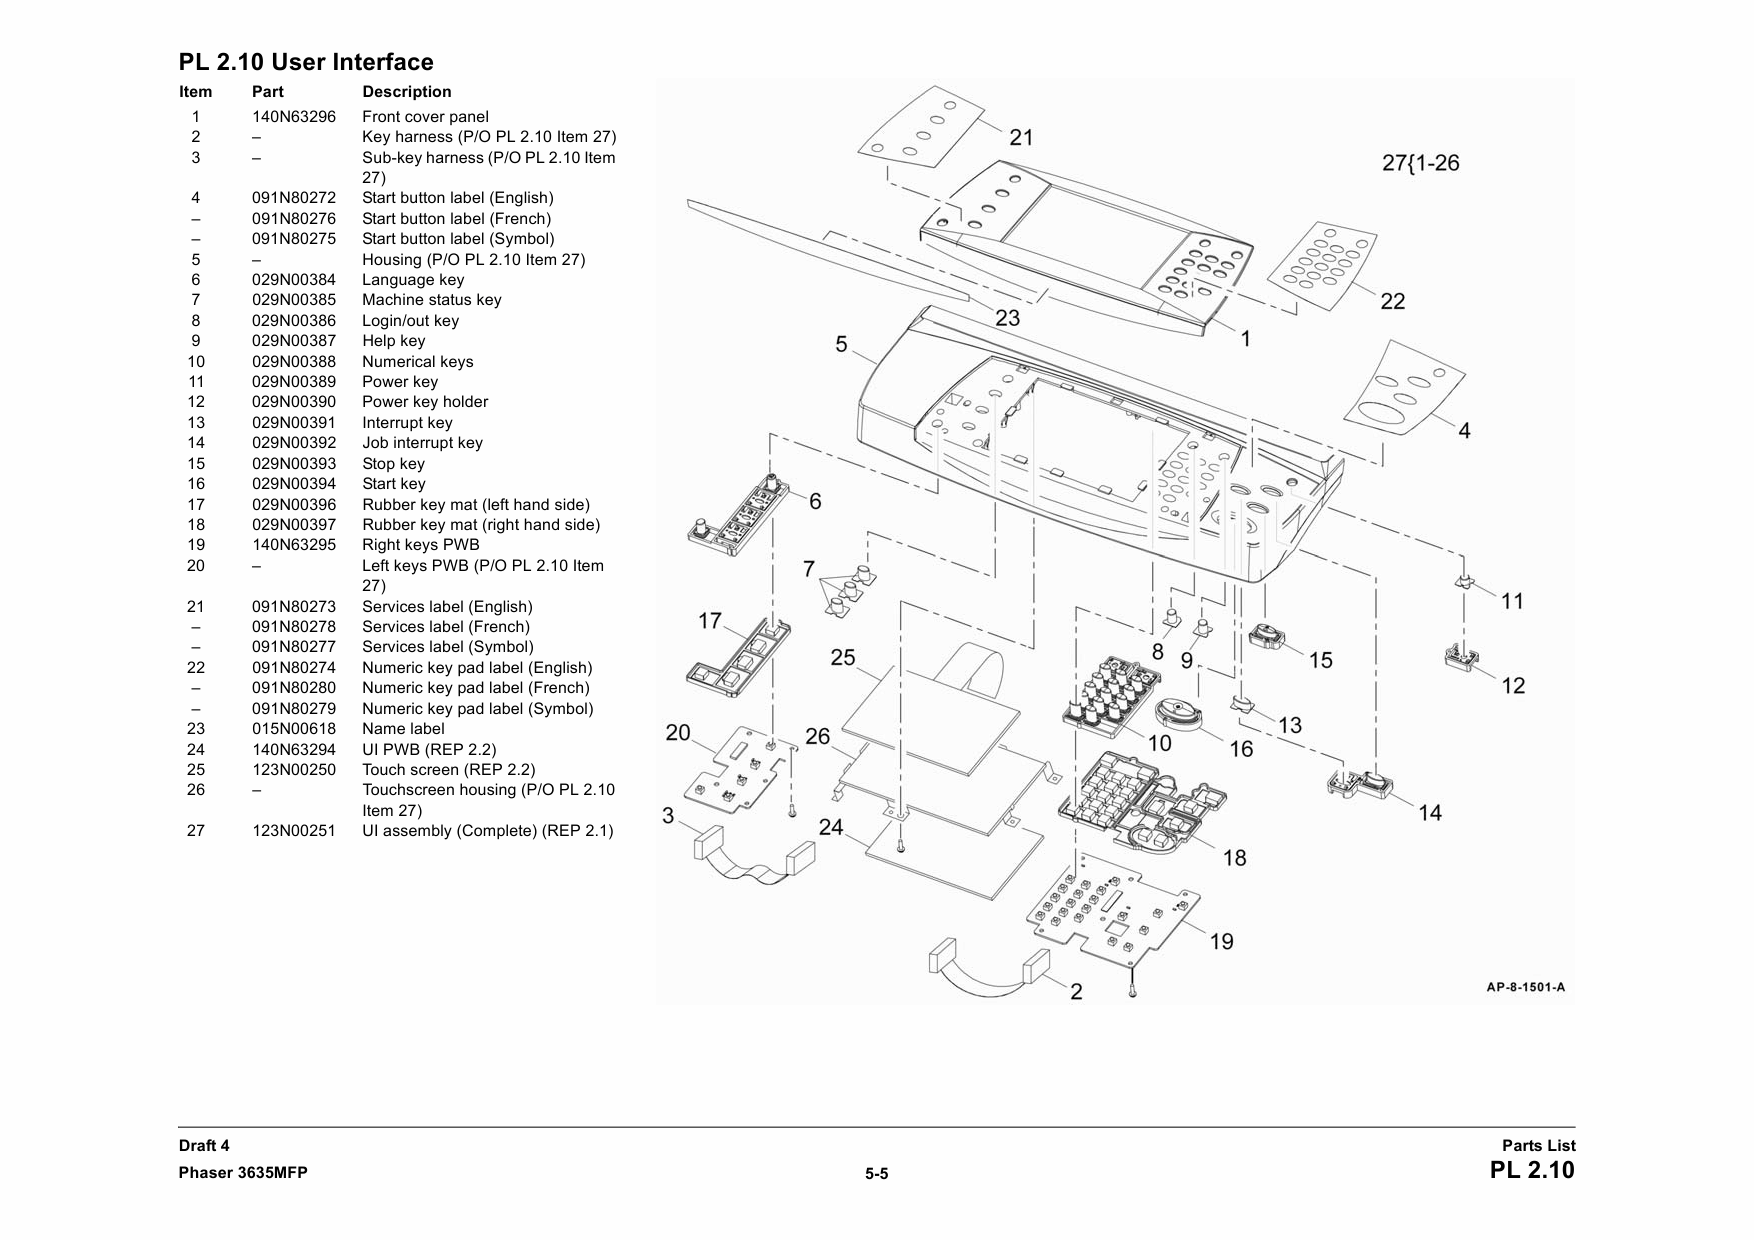 Xerox Phaser 3635-MFP Parts List and Service Manual-5